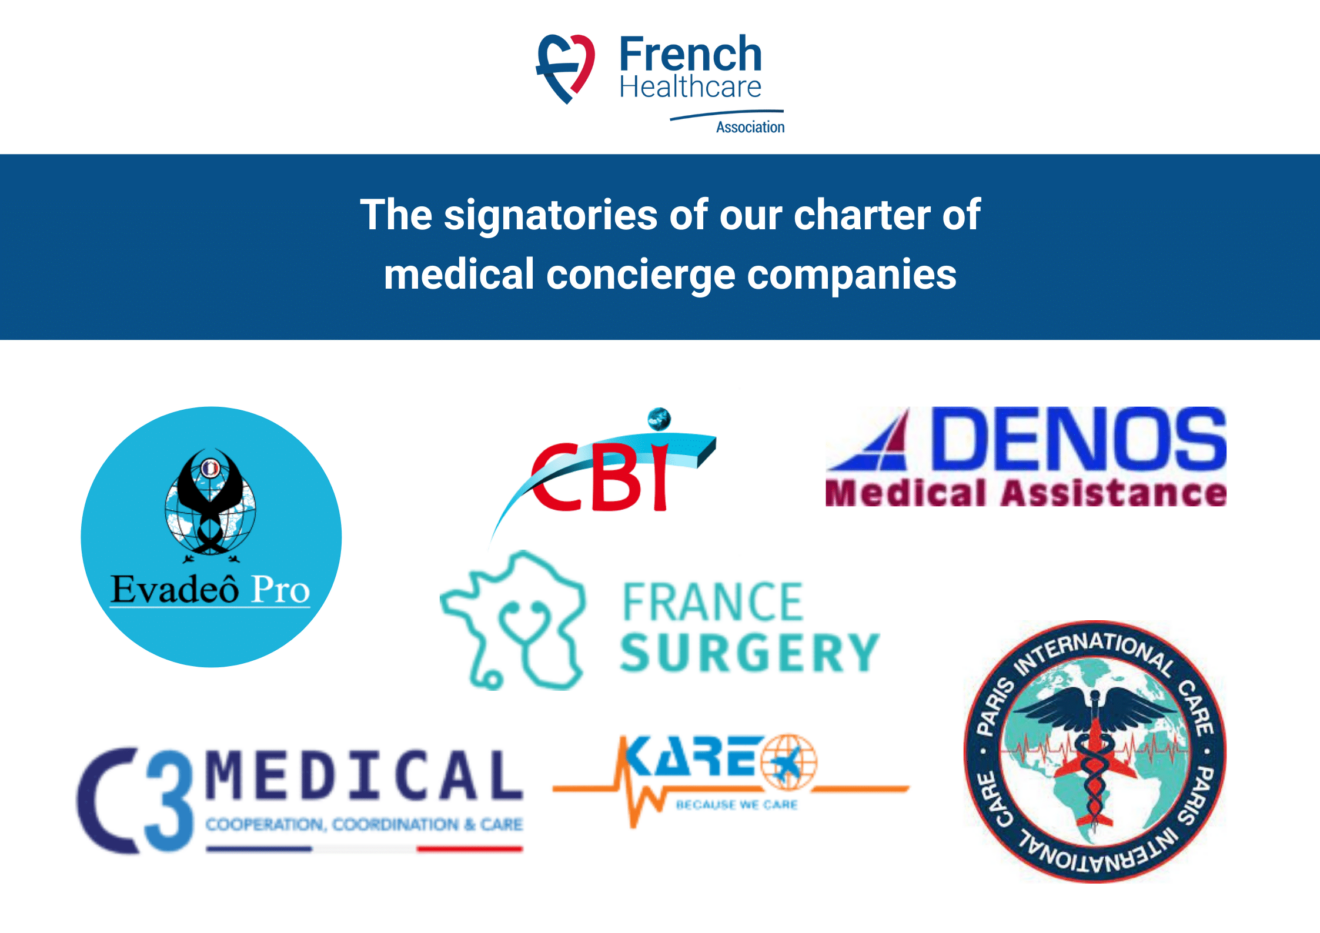 medical-concierge-companies-french-healthcare-association